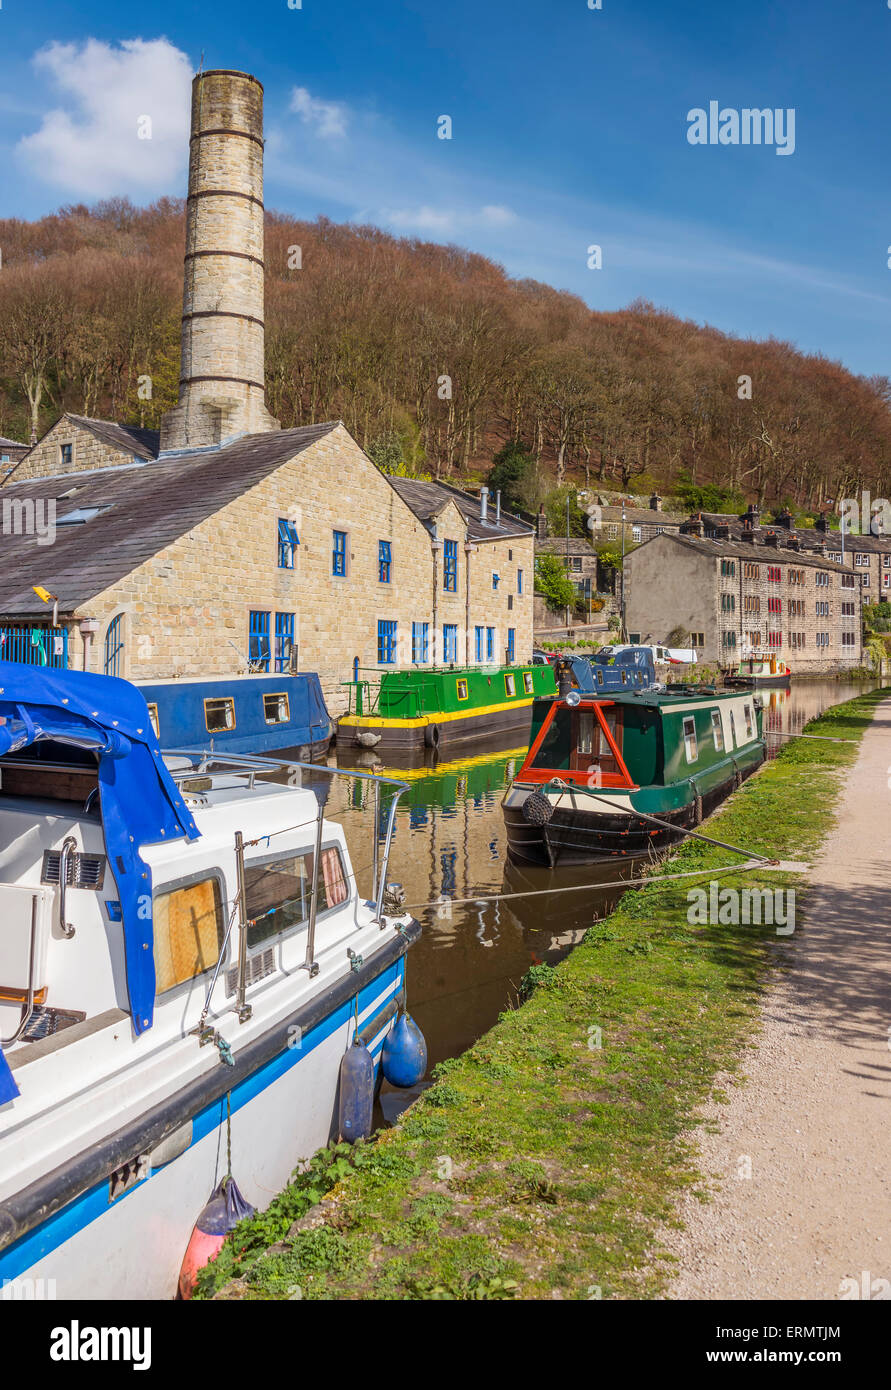 The pretty tourist town of Hebden Bridge in the South Pennine region of West Yorkshire Stock Photo